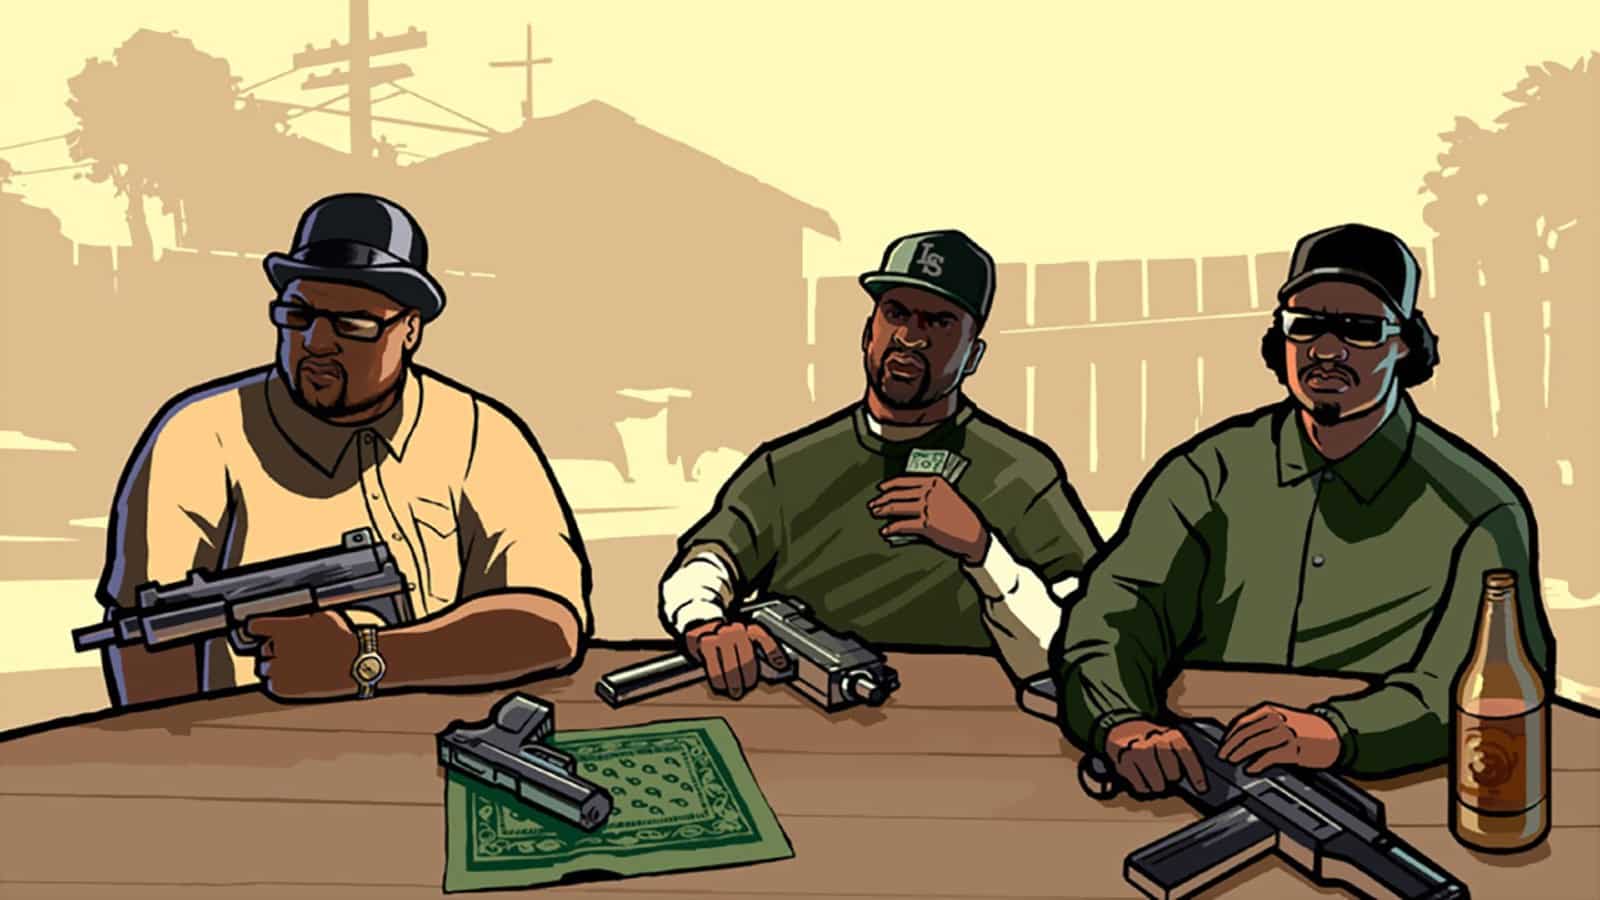 GTA San Andreas Remastered cheats for PlayStation, Xbox and PC - Dexerto